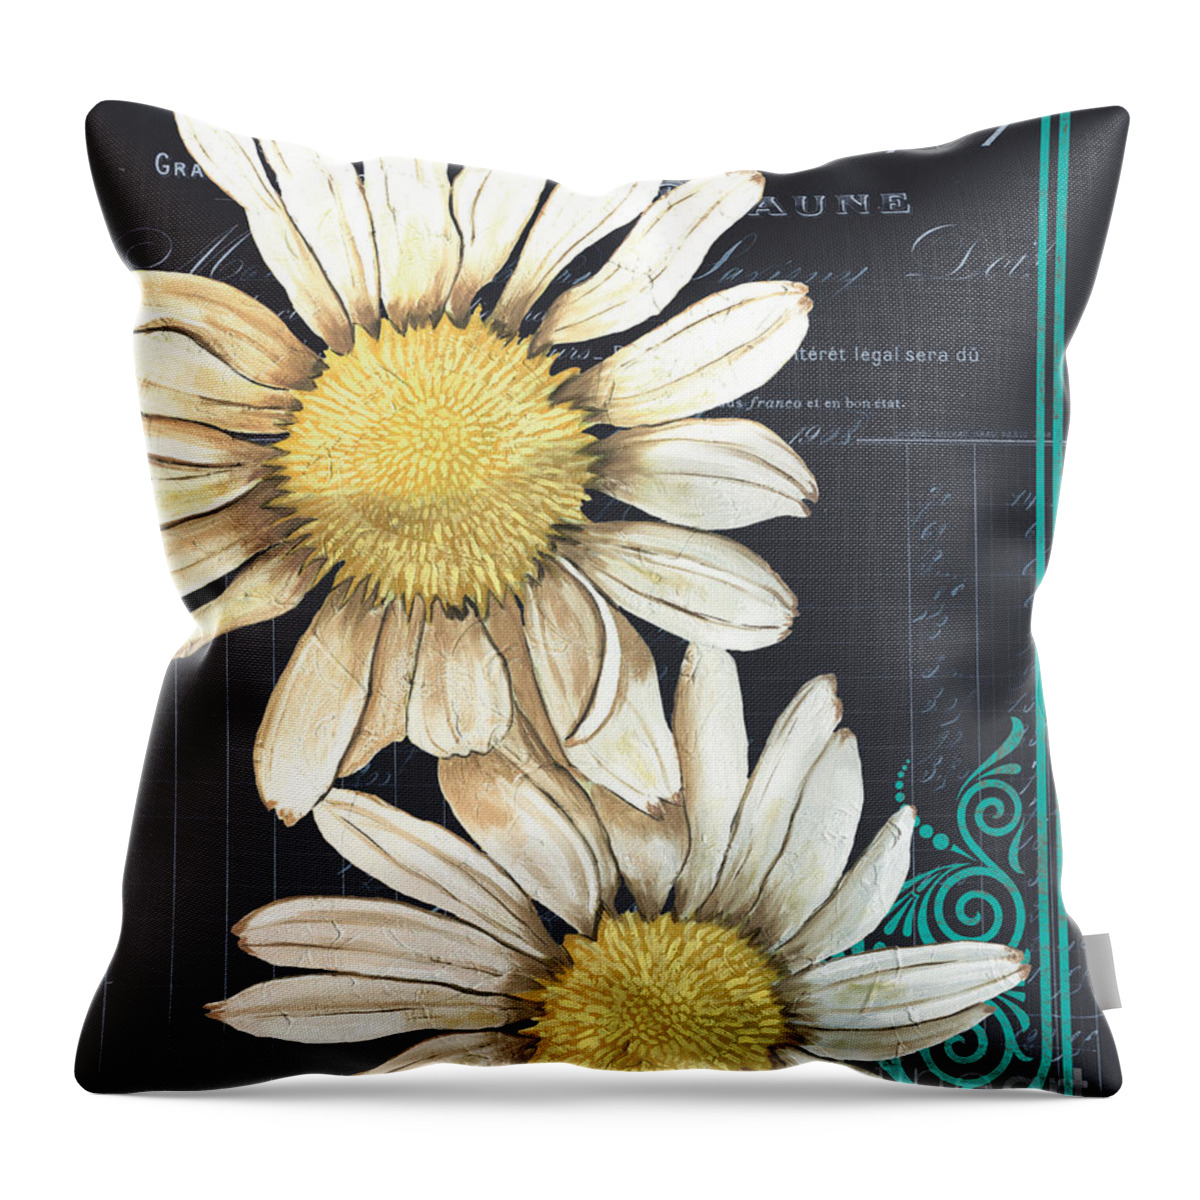 Daisy Throw Pillow featuring the painting Tranquil Daisy 1 by Debbie DeWitt